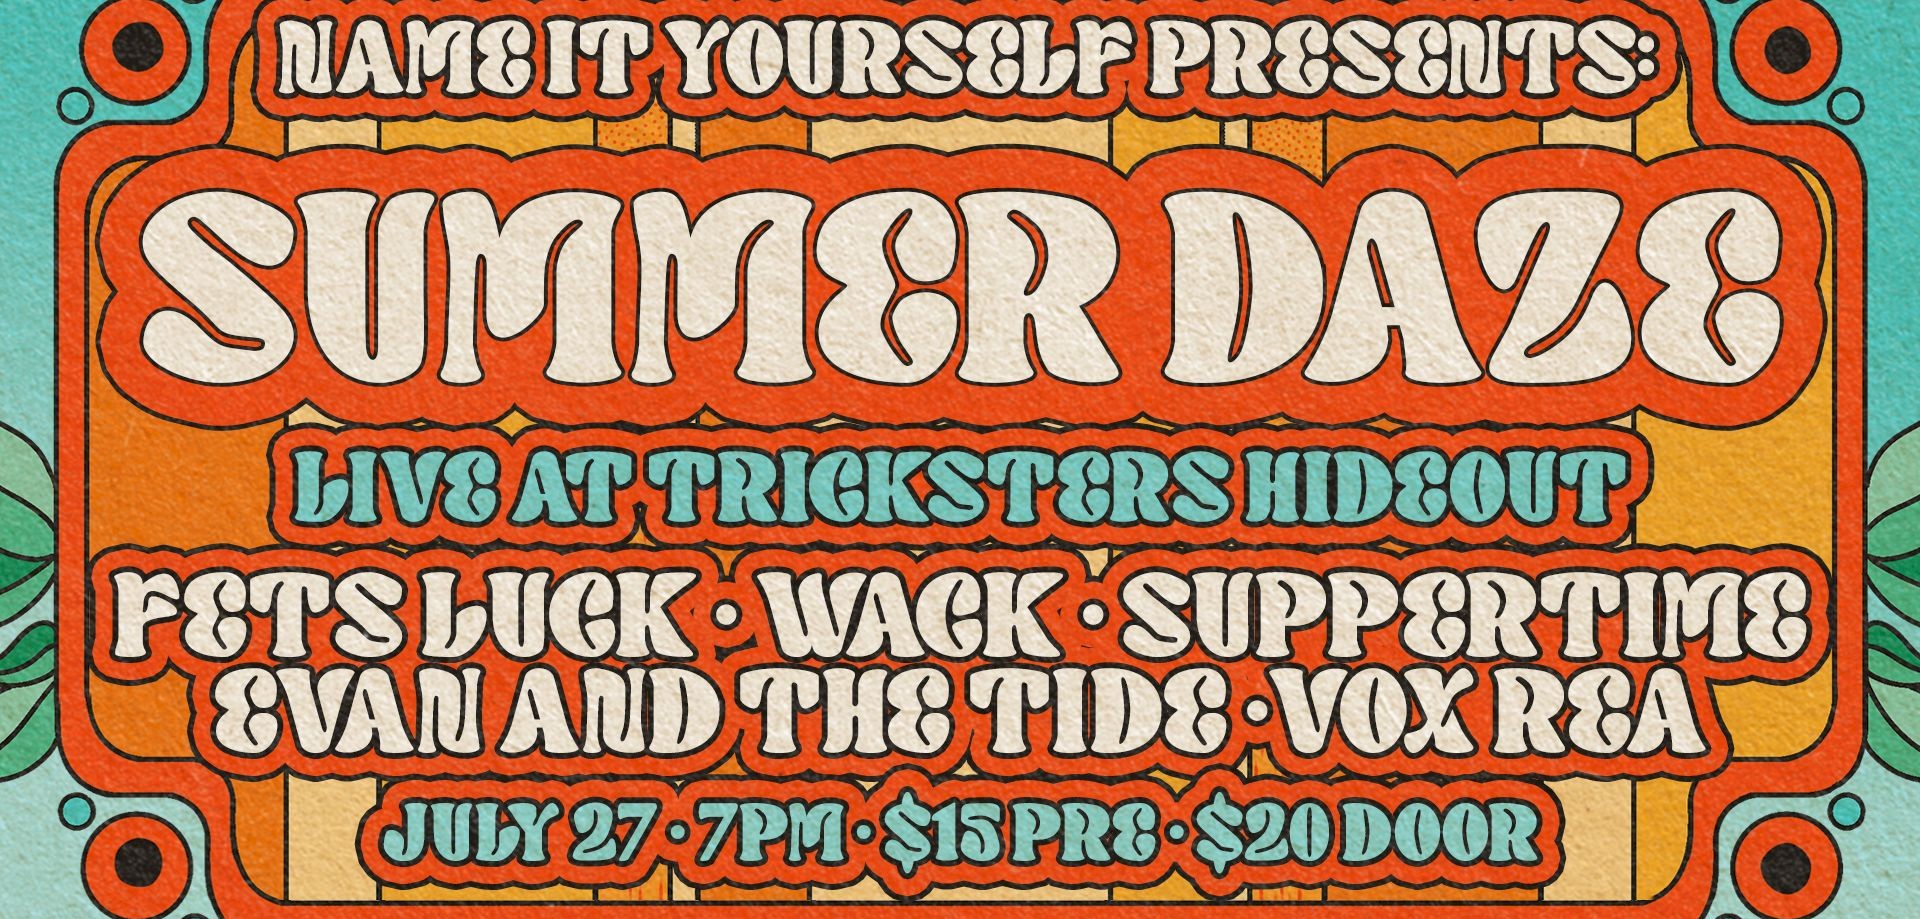 Name It Yourself Music Festival Presents: SUMMER DAZE